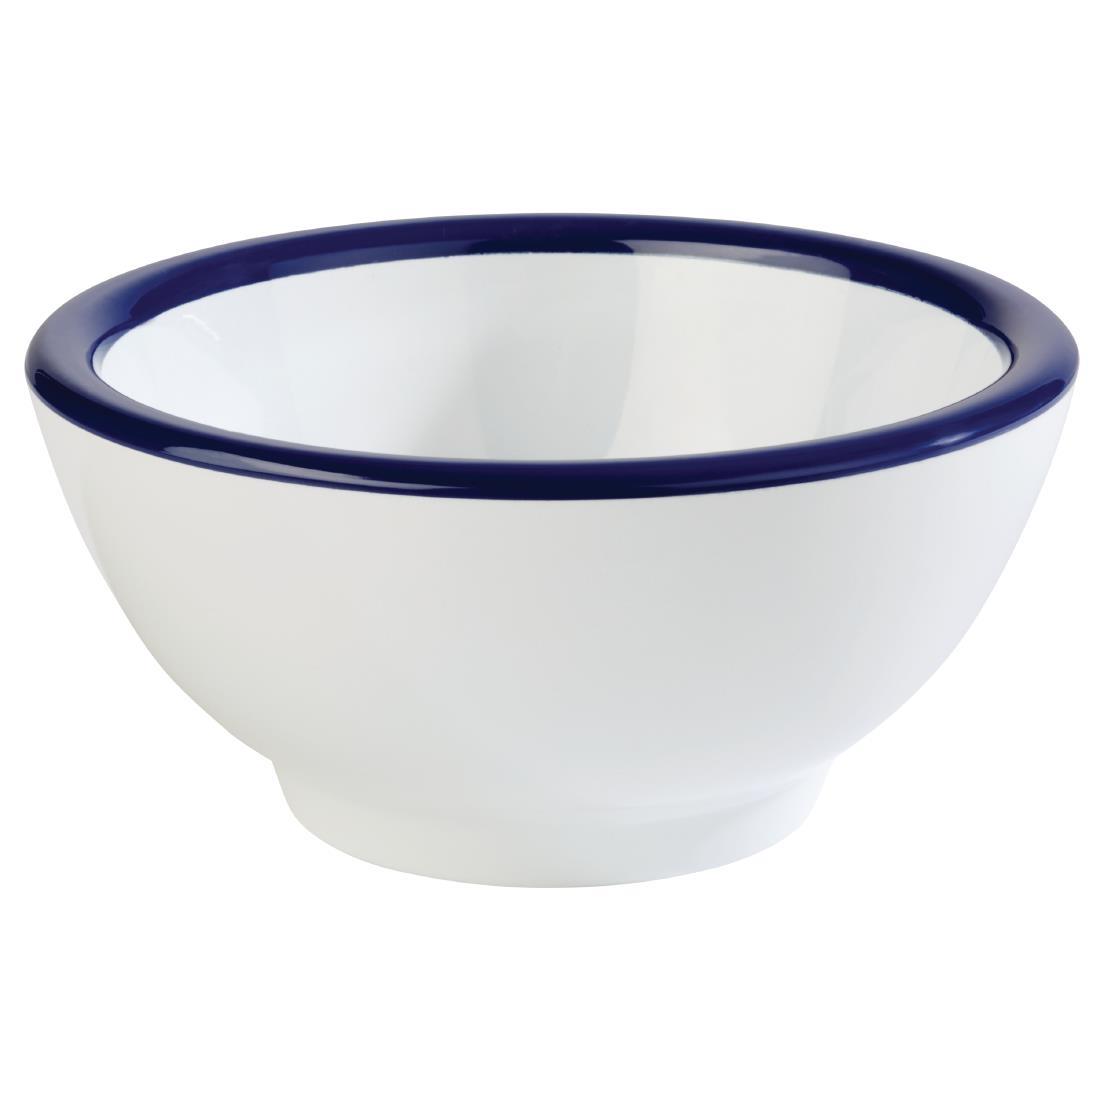 APS Pure Bowl White And Blue 95(D) x 45(H) 0.09Ltr (B2B) - FC987  - 1